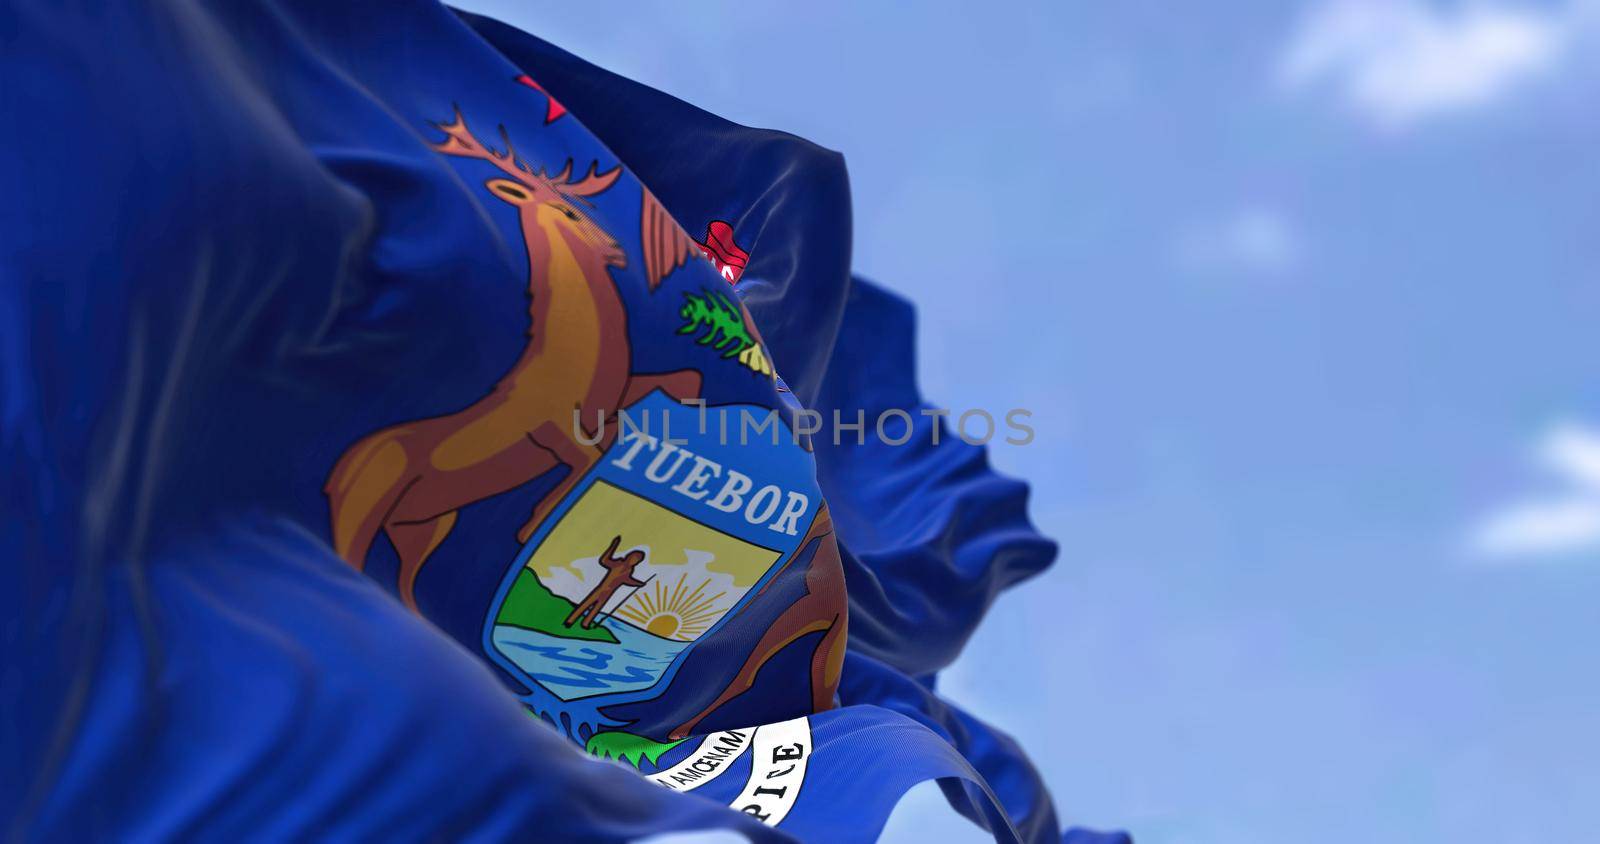 The US state flag of Michigan waving in the wind by rarrarorro